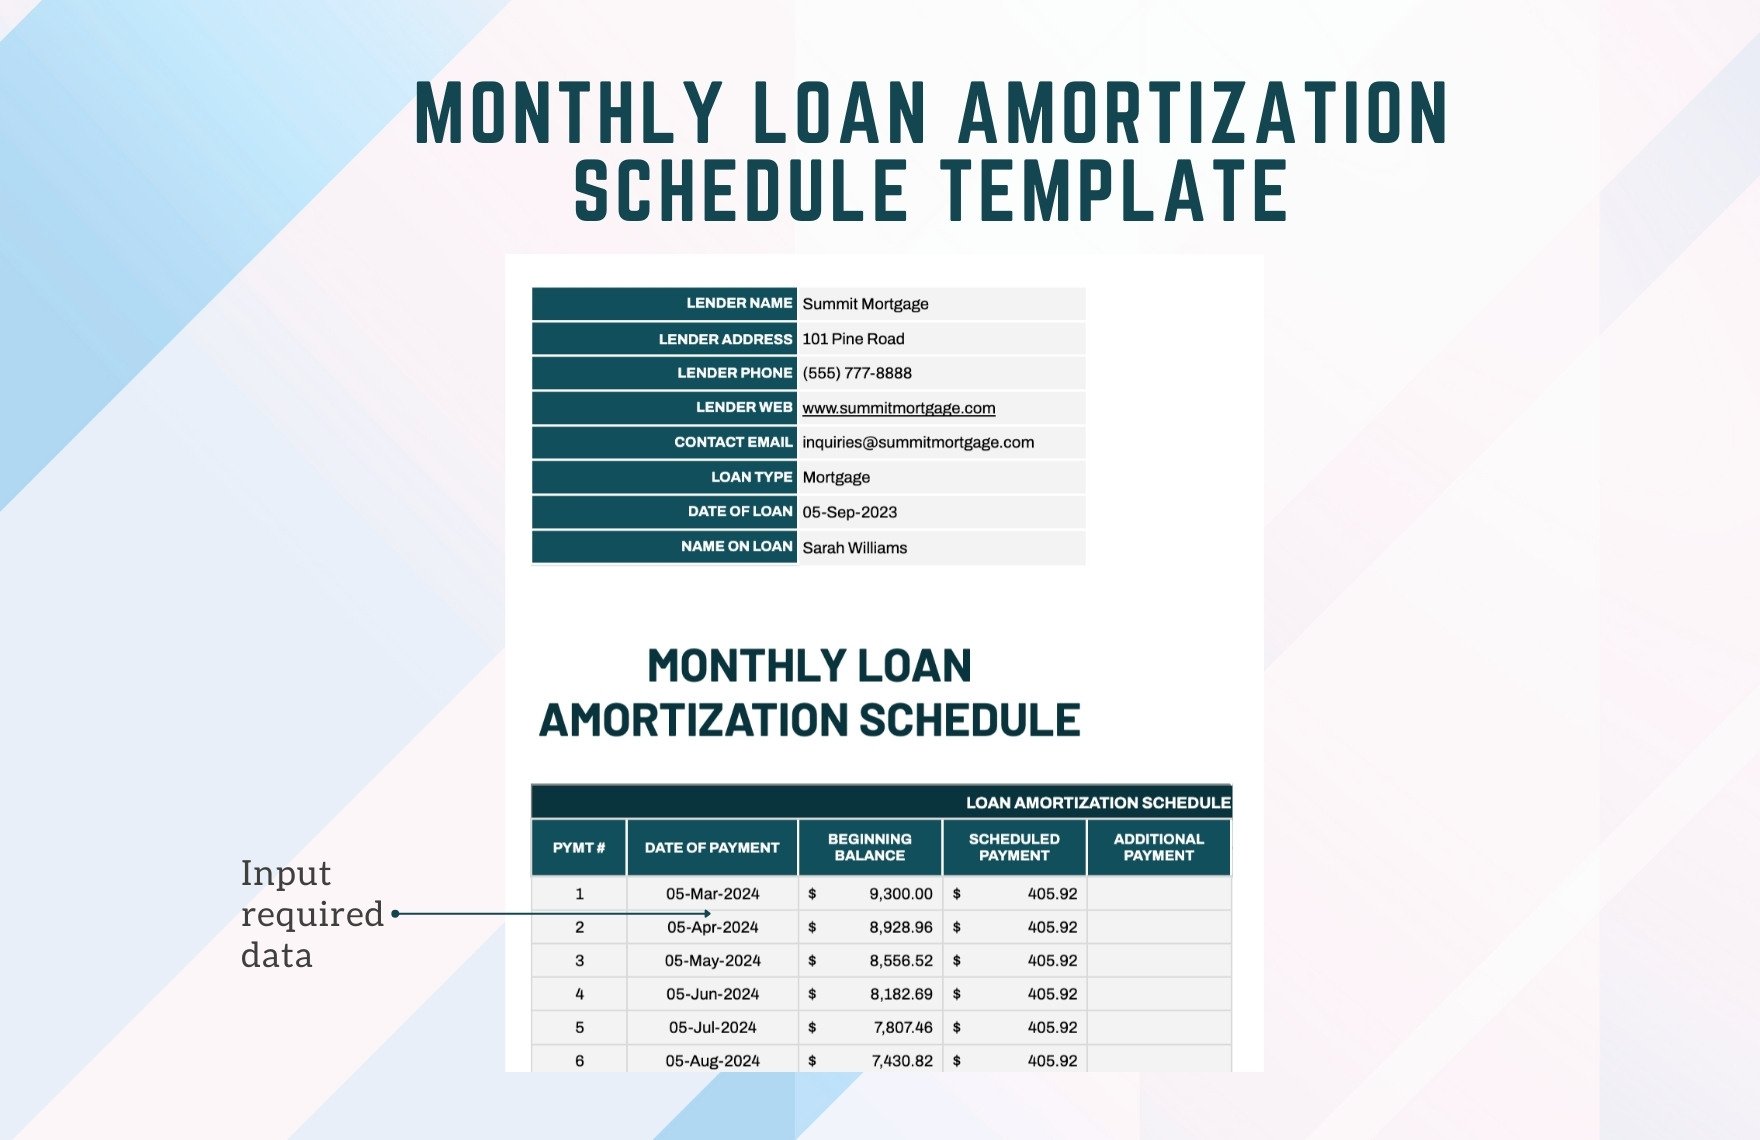 Monthly Loan Amortization Schedule Template